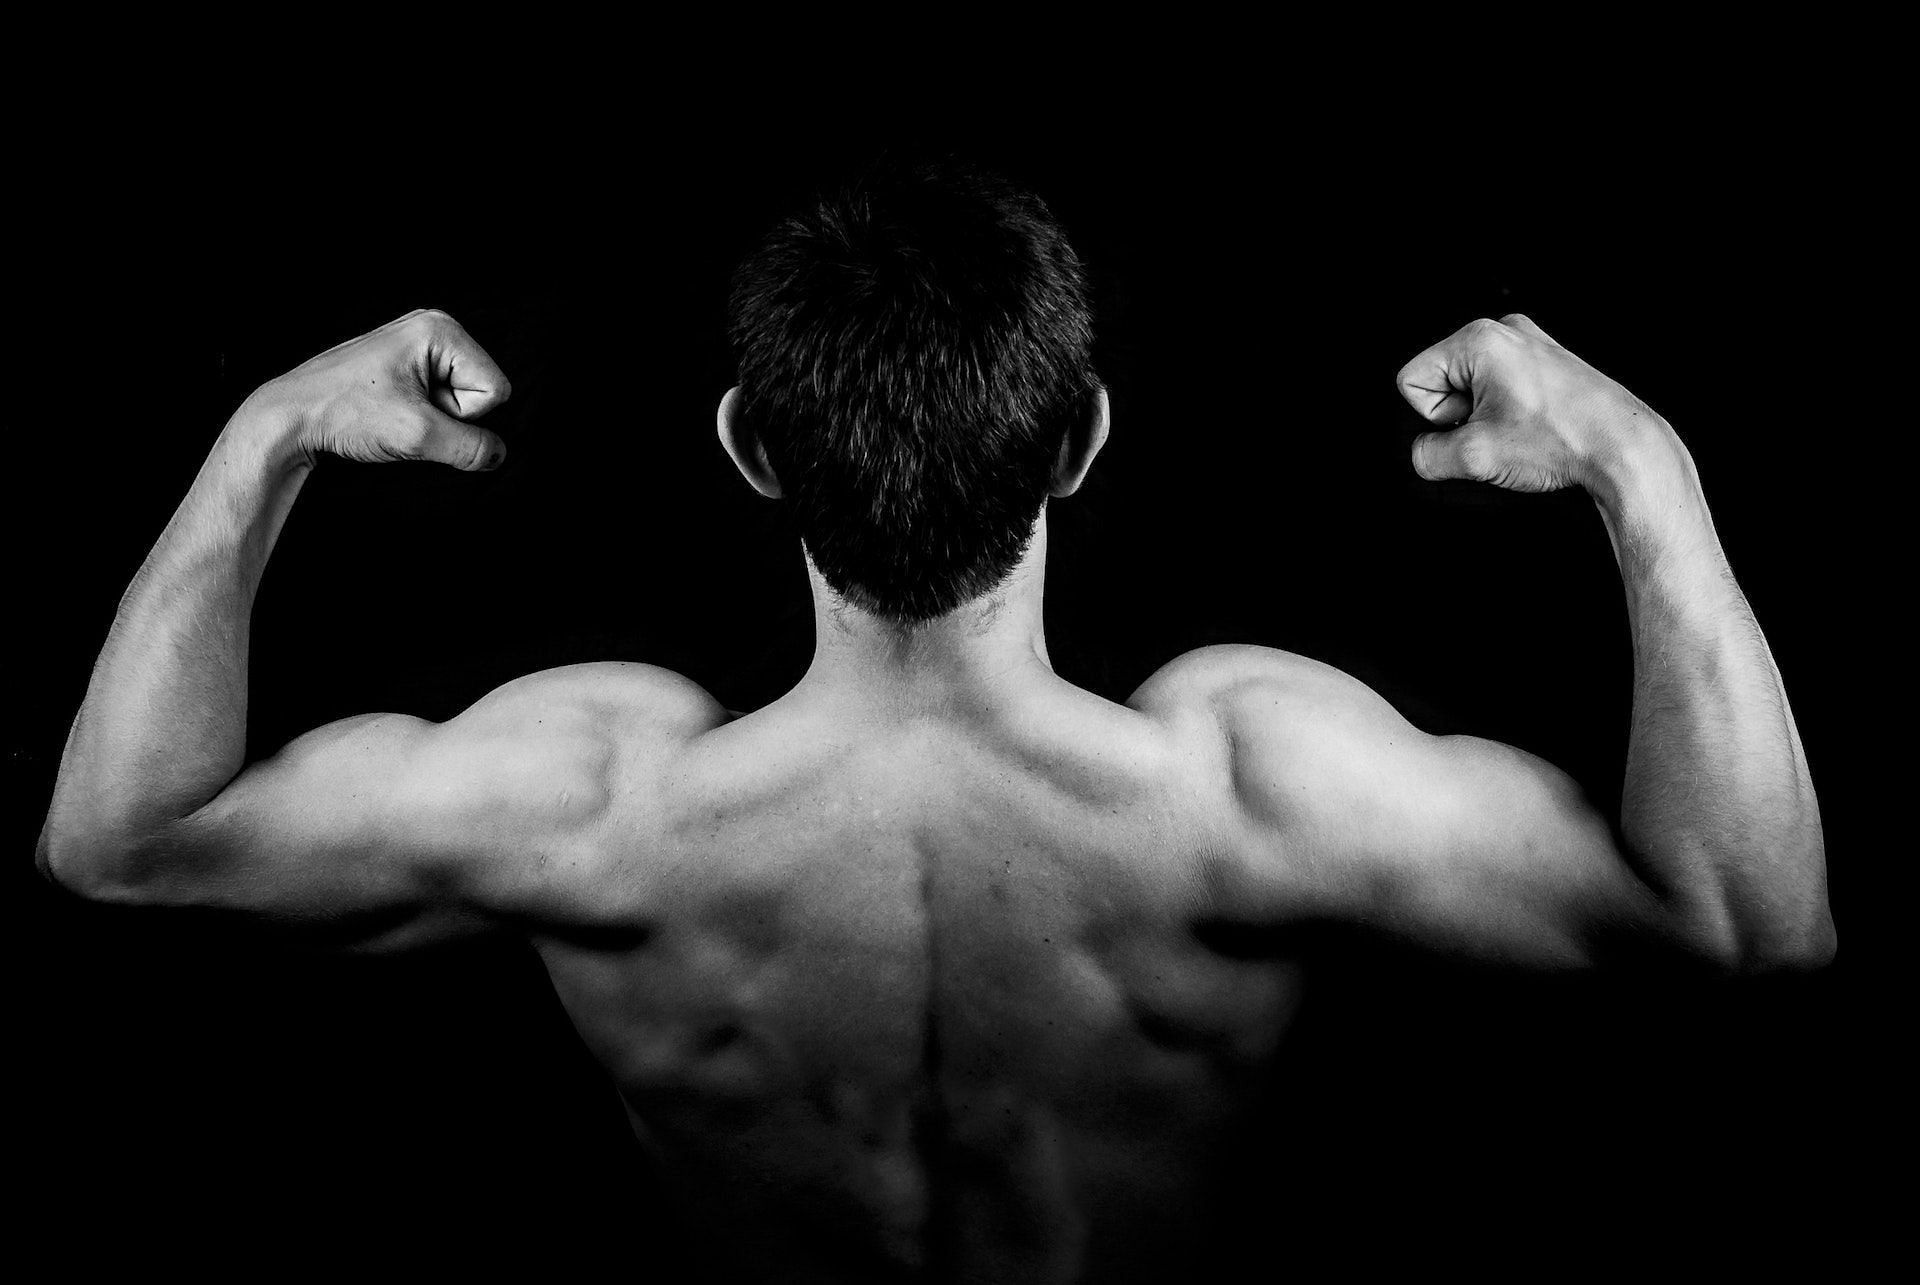 Biceps 21s is an intensive exercise. (Photo via Pexels/Pixabay)